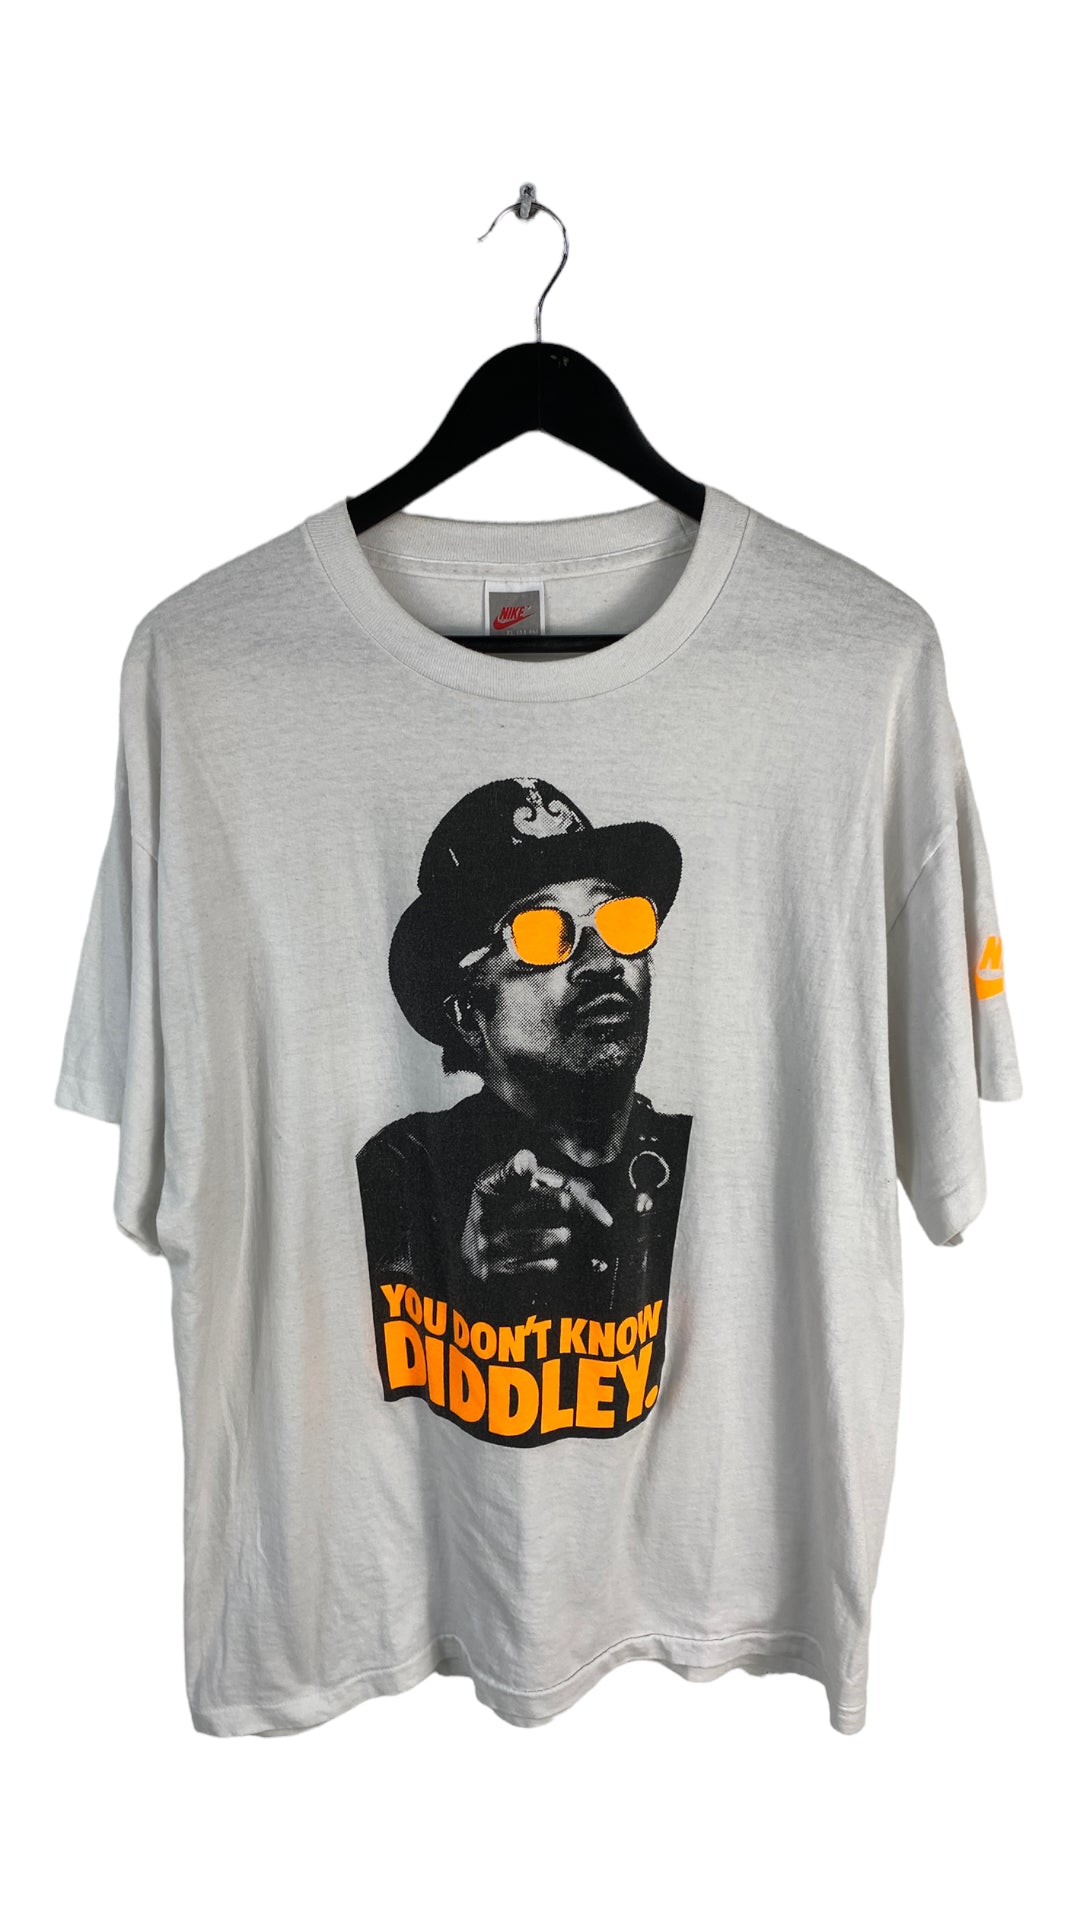 VTG Nike You Don't Know Diddley Tee Sz XL